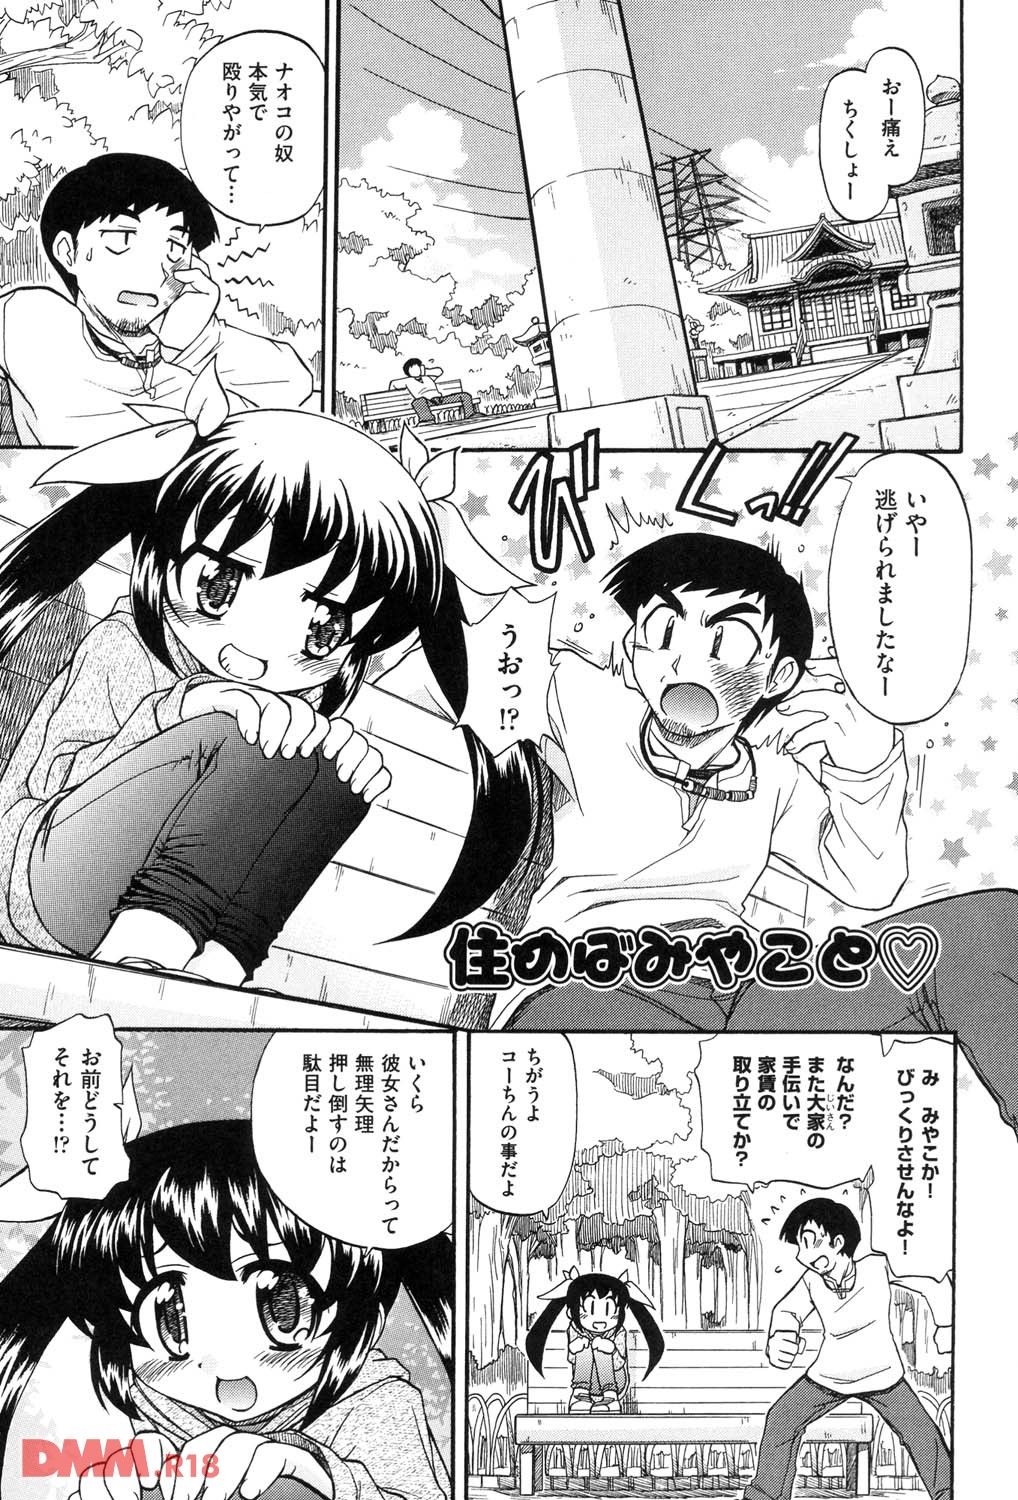 "Persistent lie." "this sex c." I got have sex? "It's words in a consensual and boyfriend say she's rare wwwwww 2